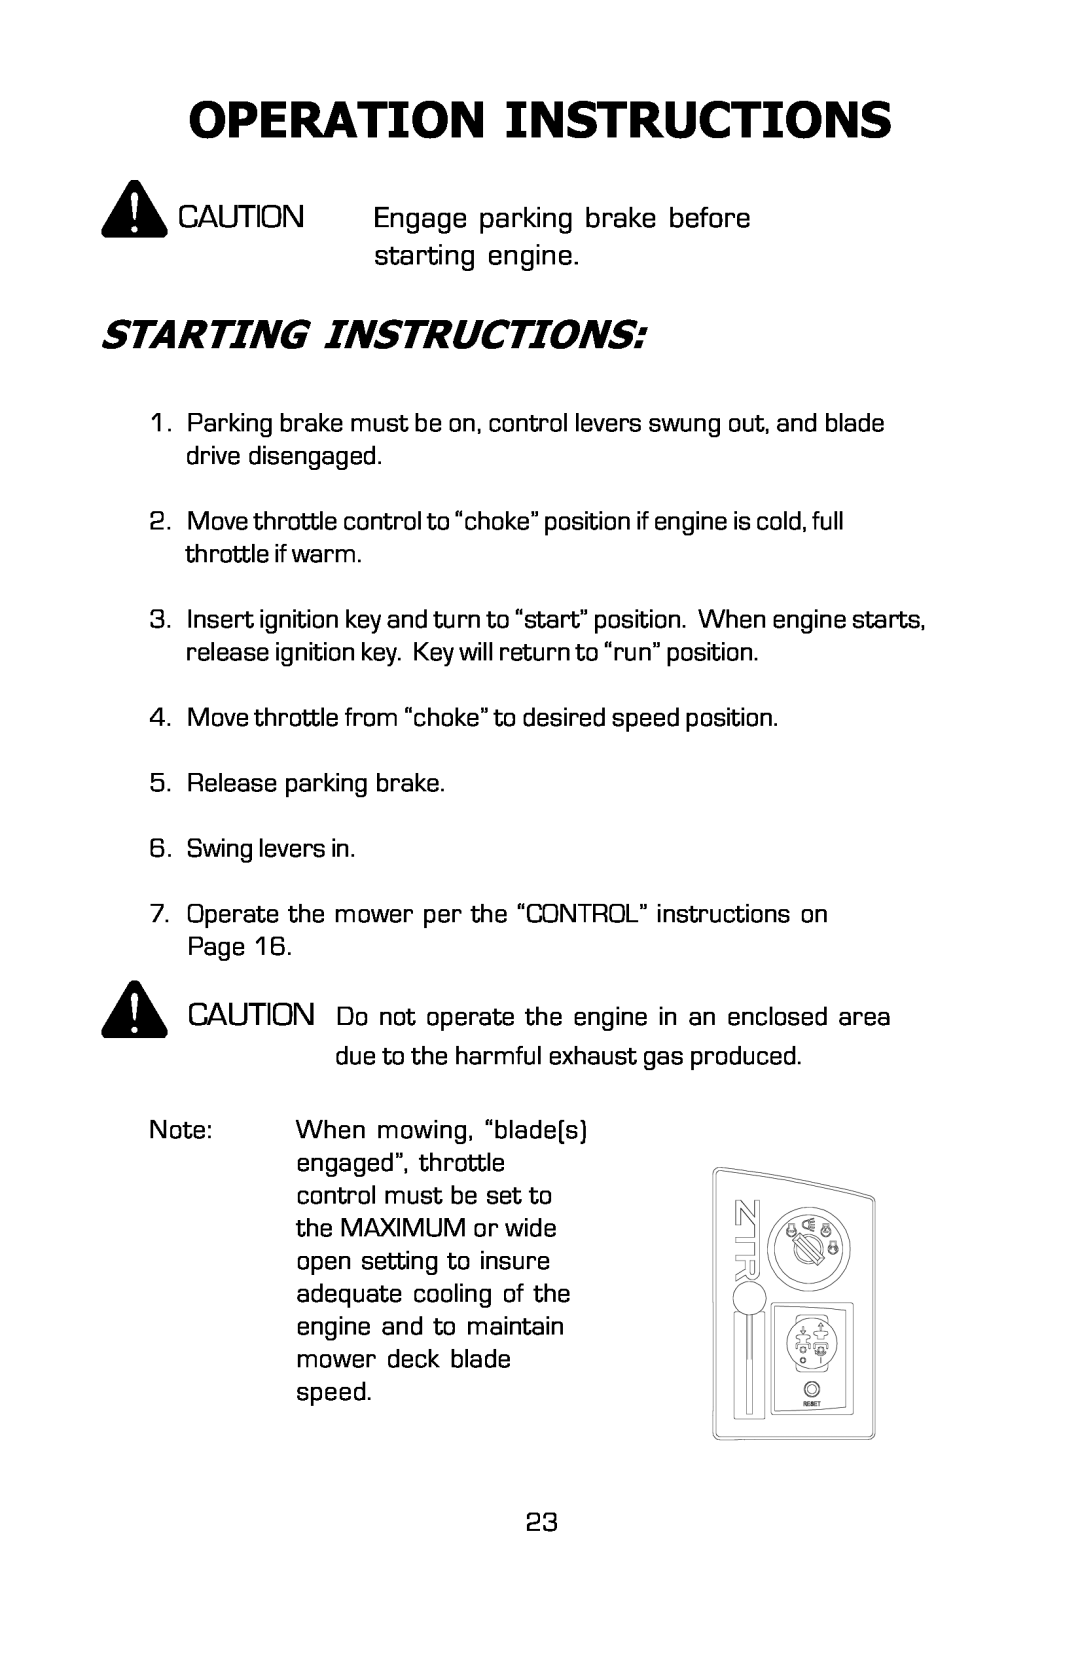 Dixon 16134-0803 manual Operation Instructions, Starting Instructions, CAUTION Engage parking brake before starting engine 